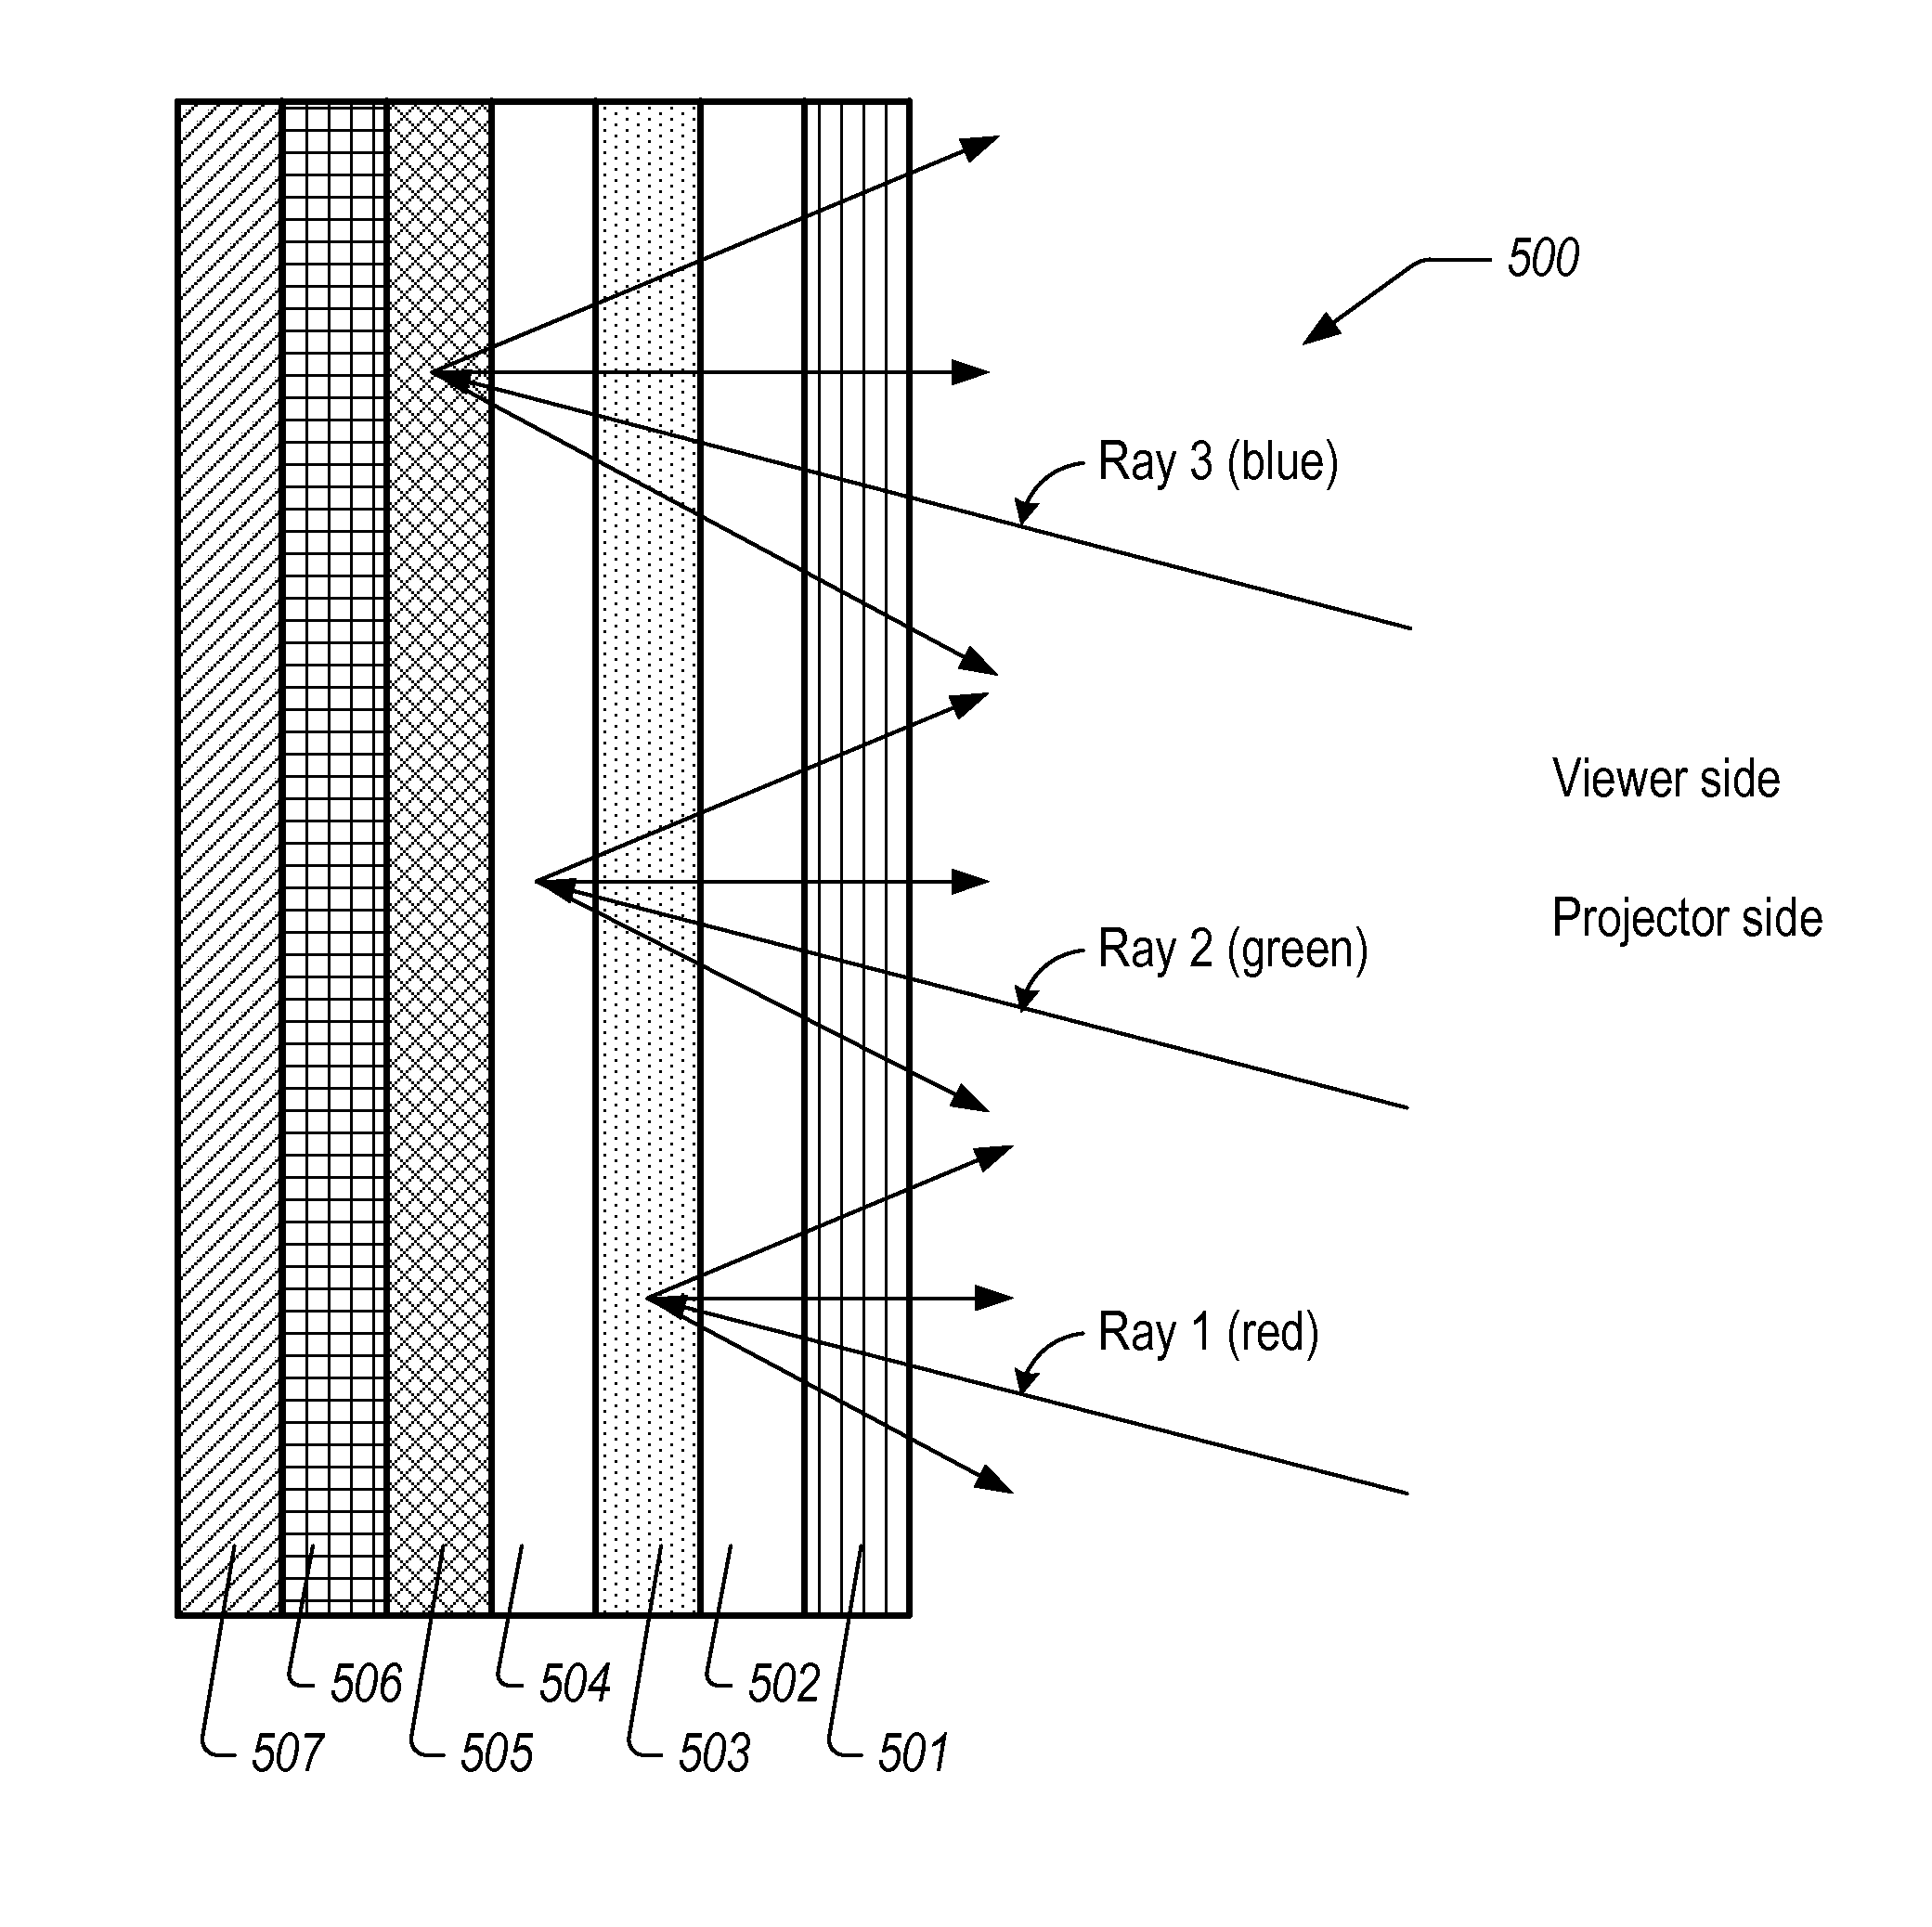 Display systems and methods employing wavelength multiplexing of colors